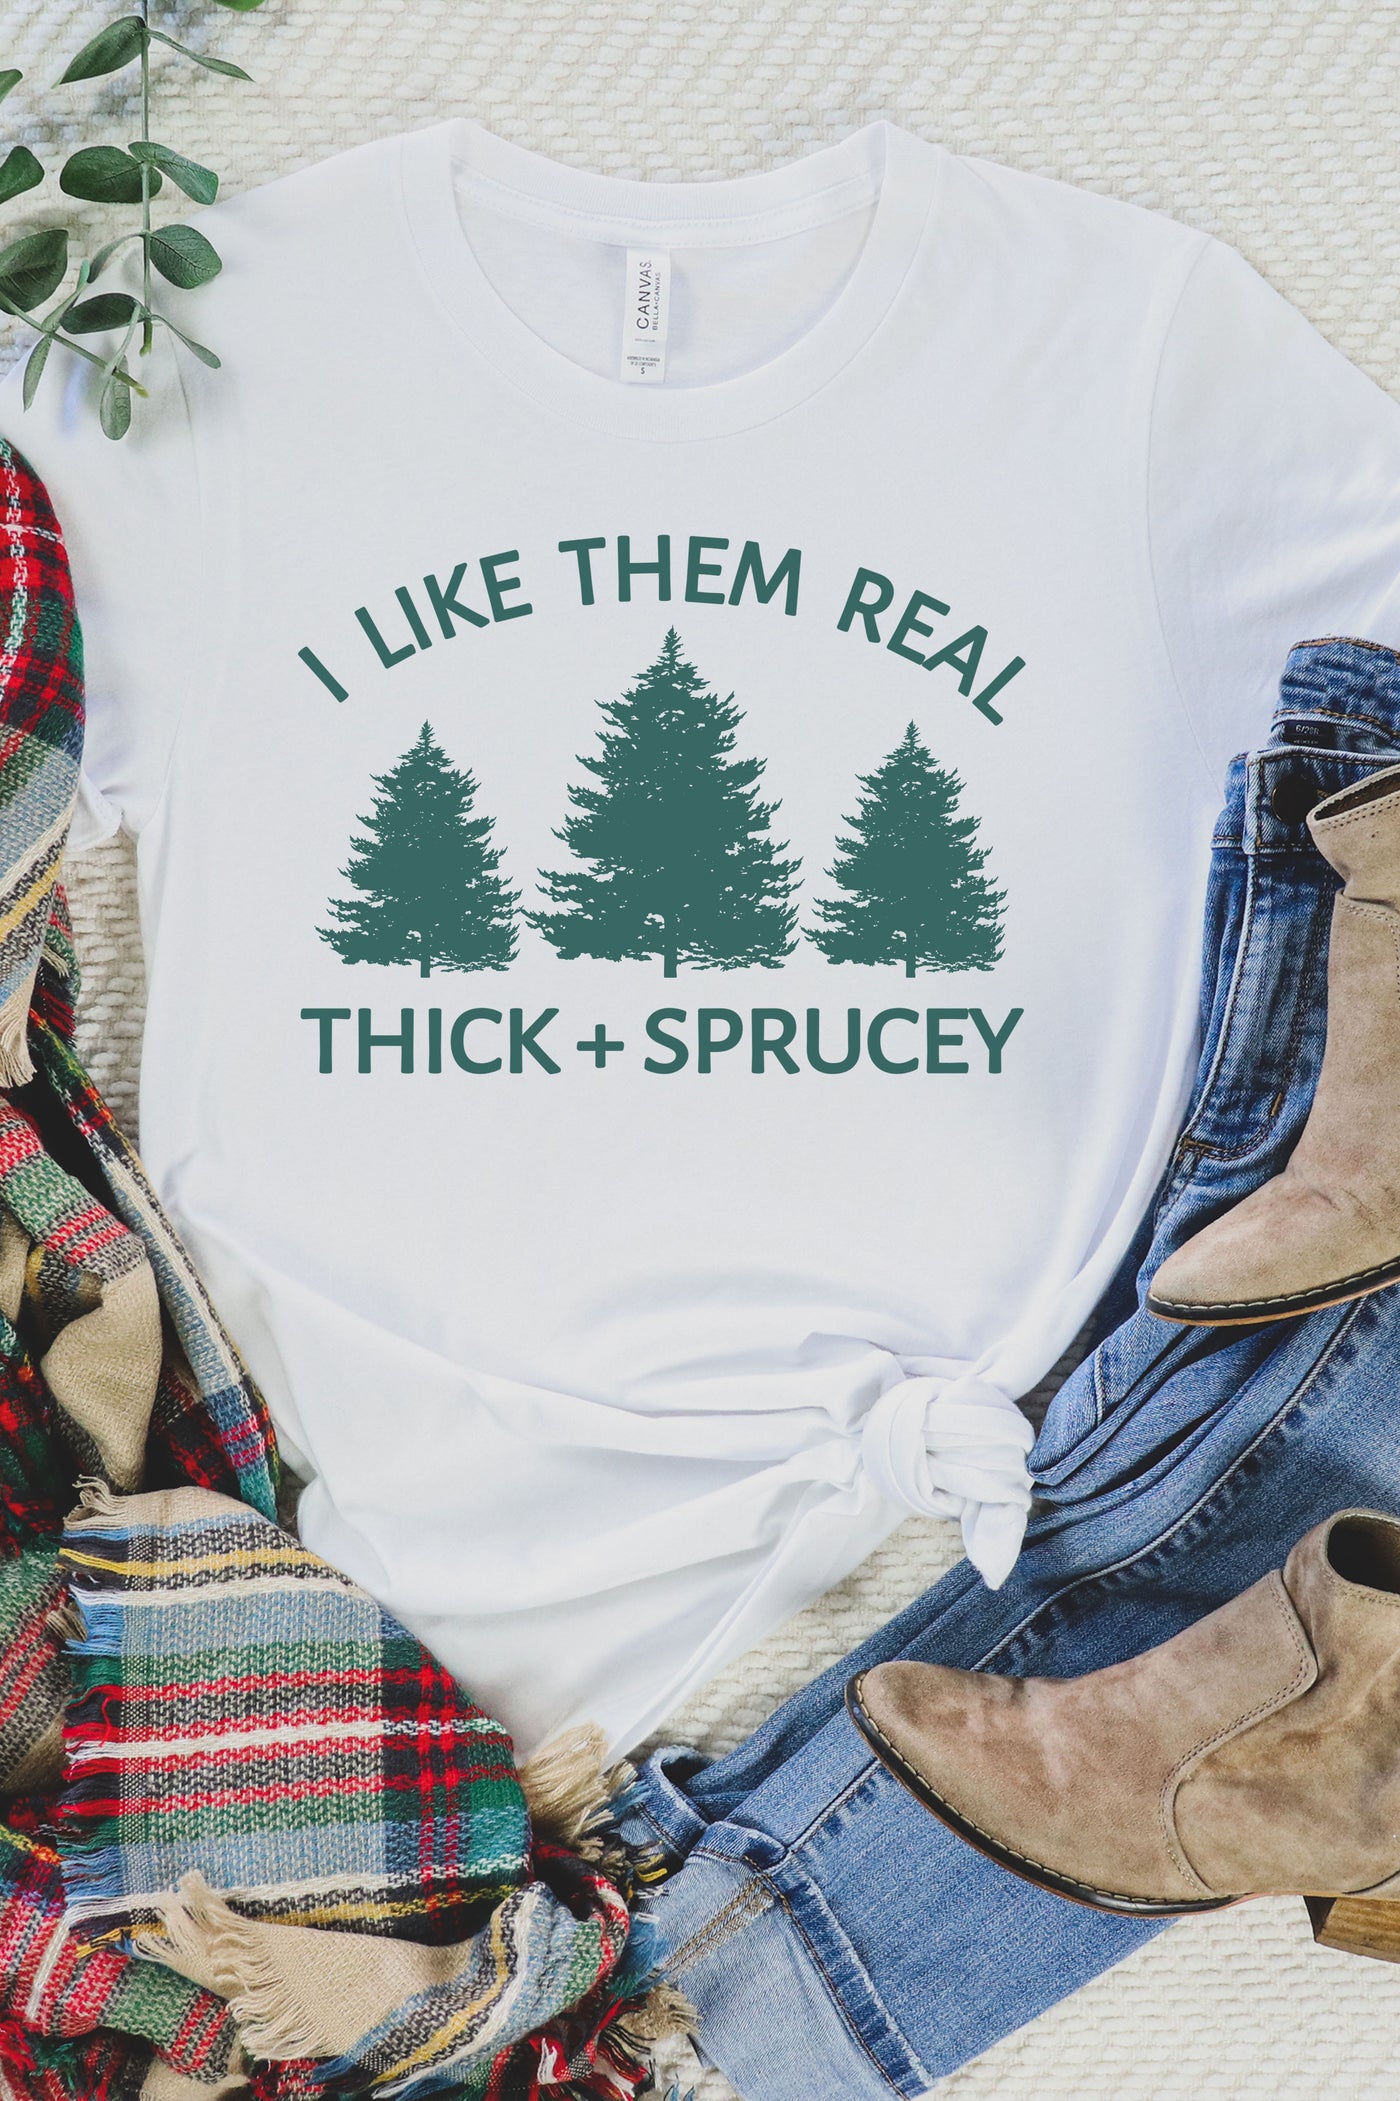 THICK + SPRUCEY